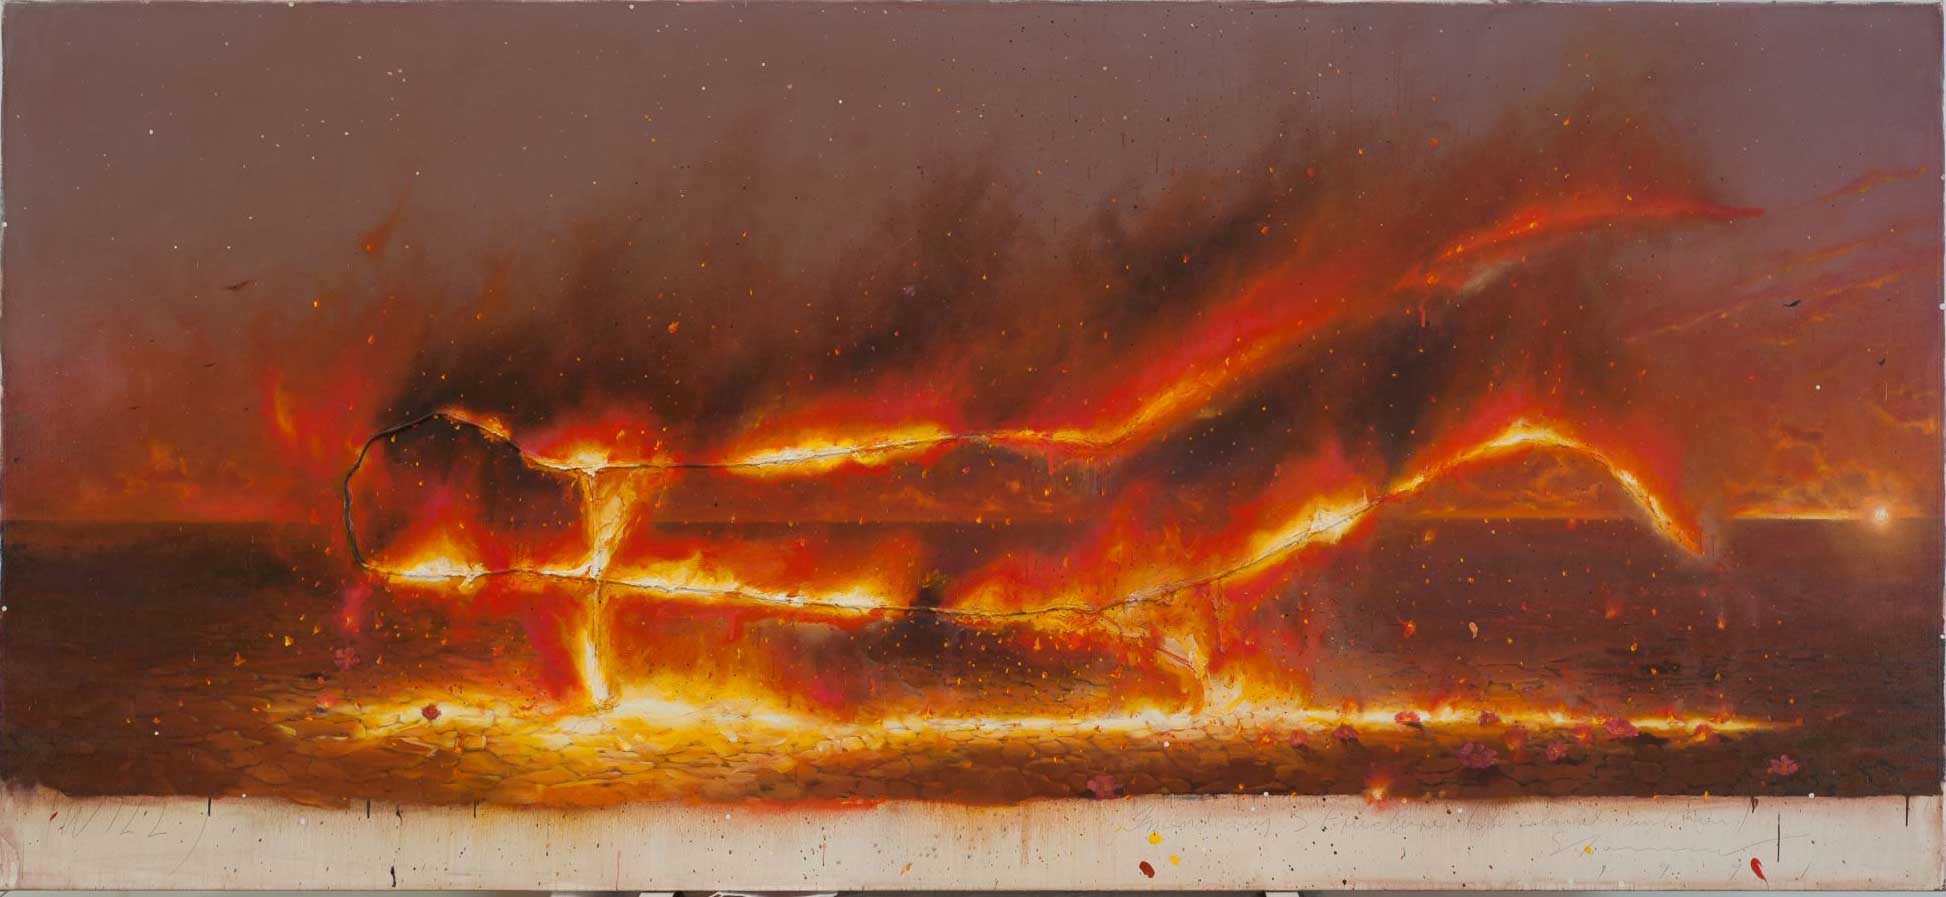 Tim STORRIER Born: Camperdown, New South Wales, Australia 1949 Incendiary Structure (for colonial ambition) 1991 synthetic polymer paint on canvas, rope, 182.5 x 396.5 cm Benalla Art Gallery Collection Gift of the artist, 2007 2007.32 © Tim Storrier